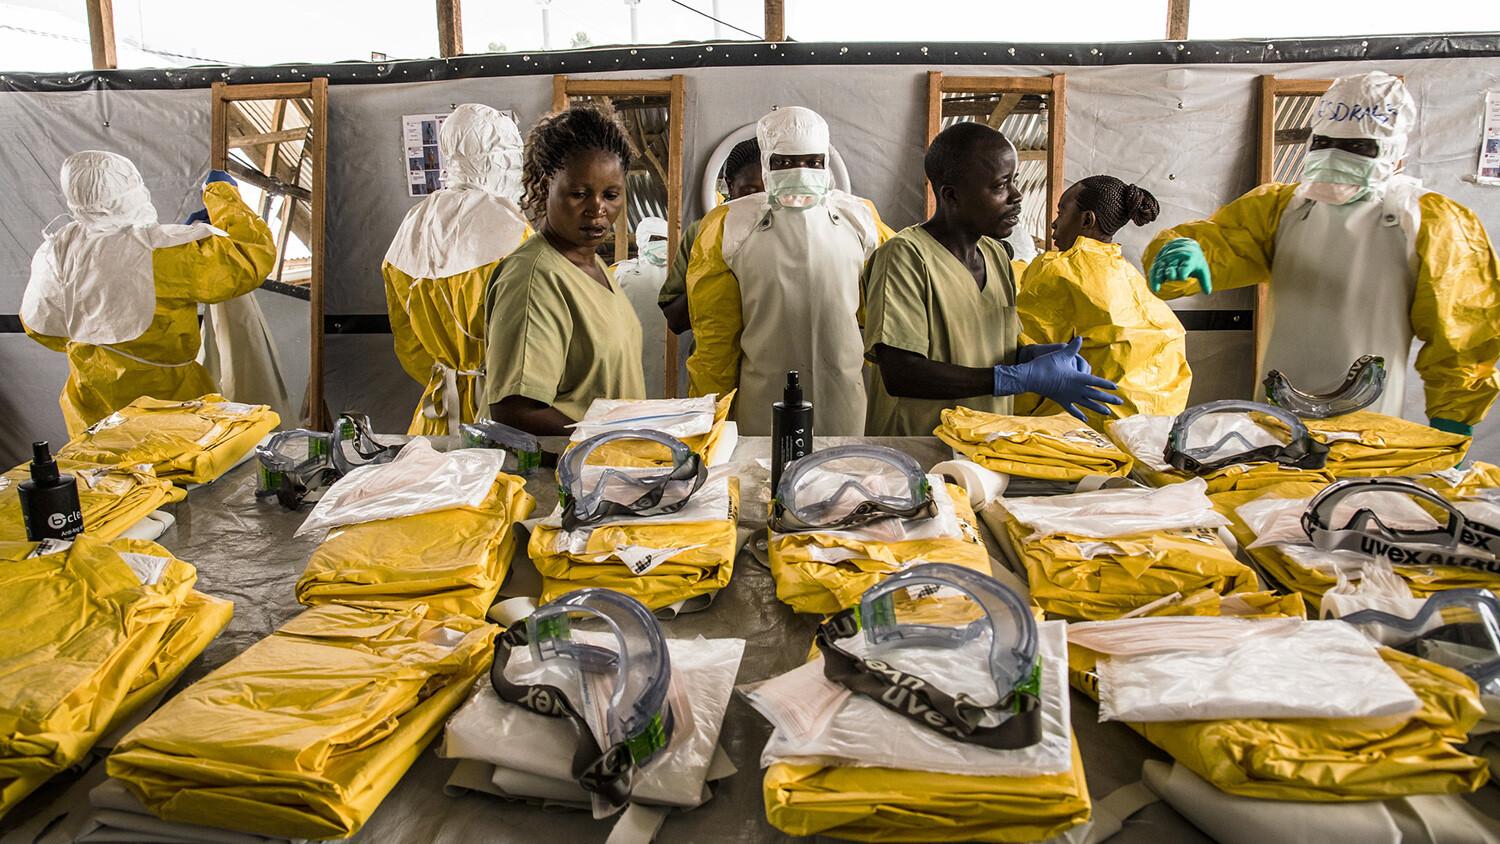 Healthcare workers put their personal protective equipment on before entering the zone with people suspected of having Ebola.